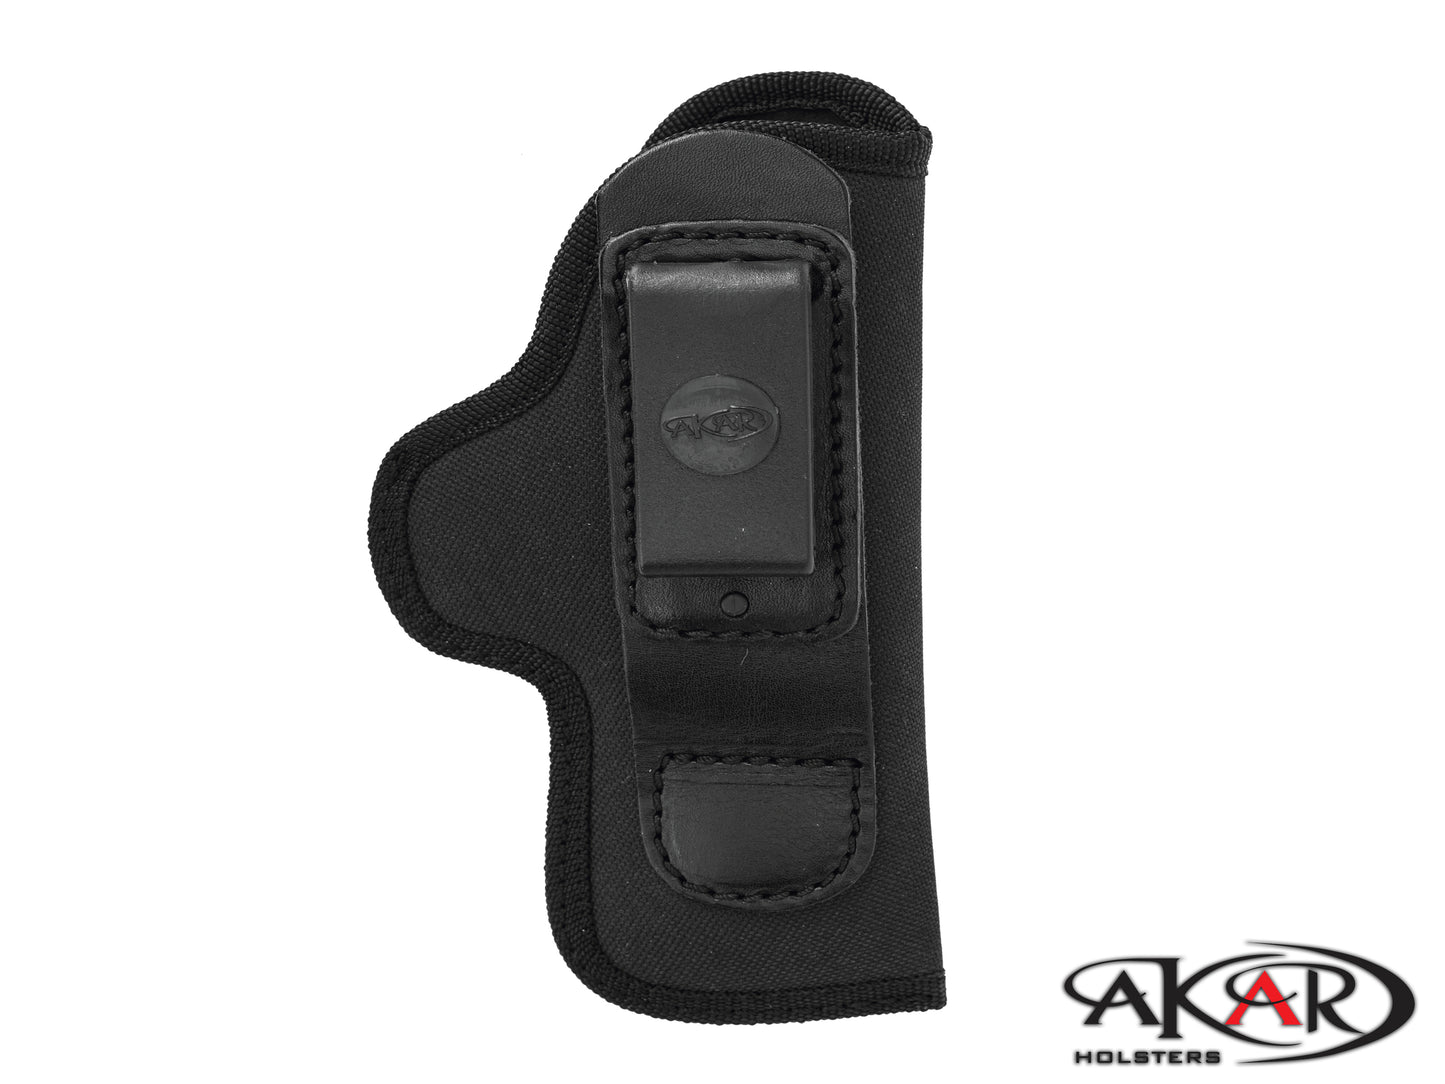 Smith & Wesson 686 4" TUCK TUCKABLE INSIDE THE PANTS ITP IWB ITW HOLSTER, Akar